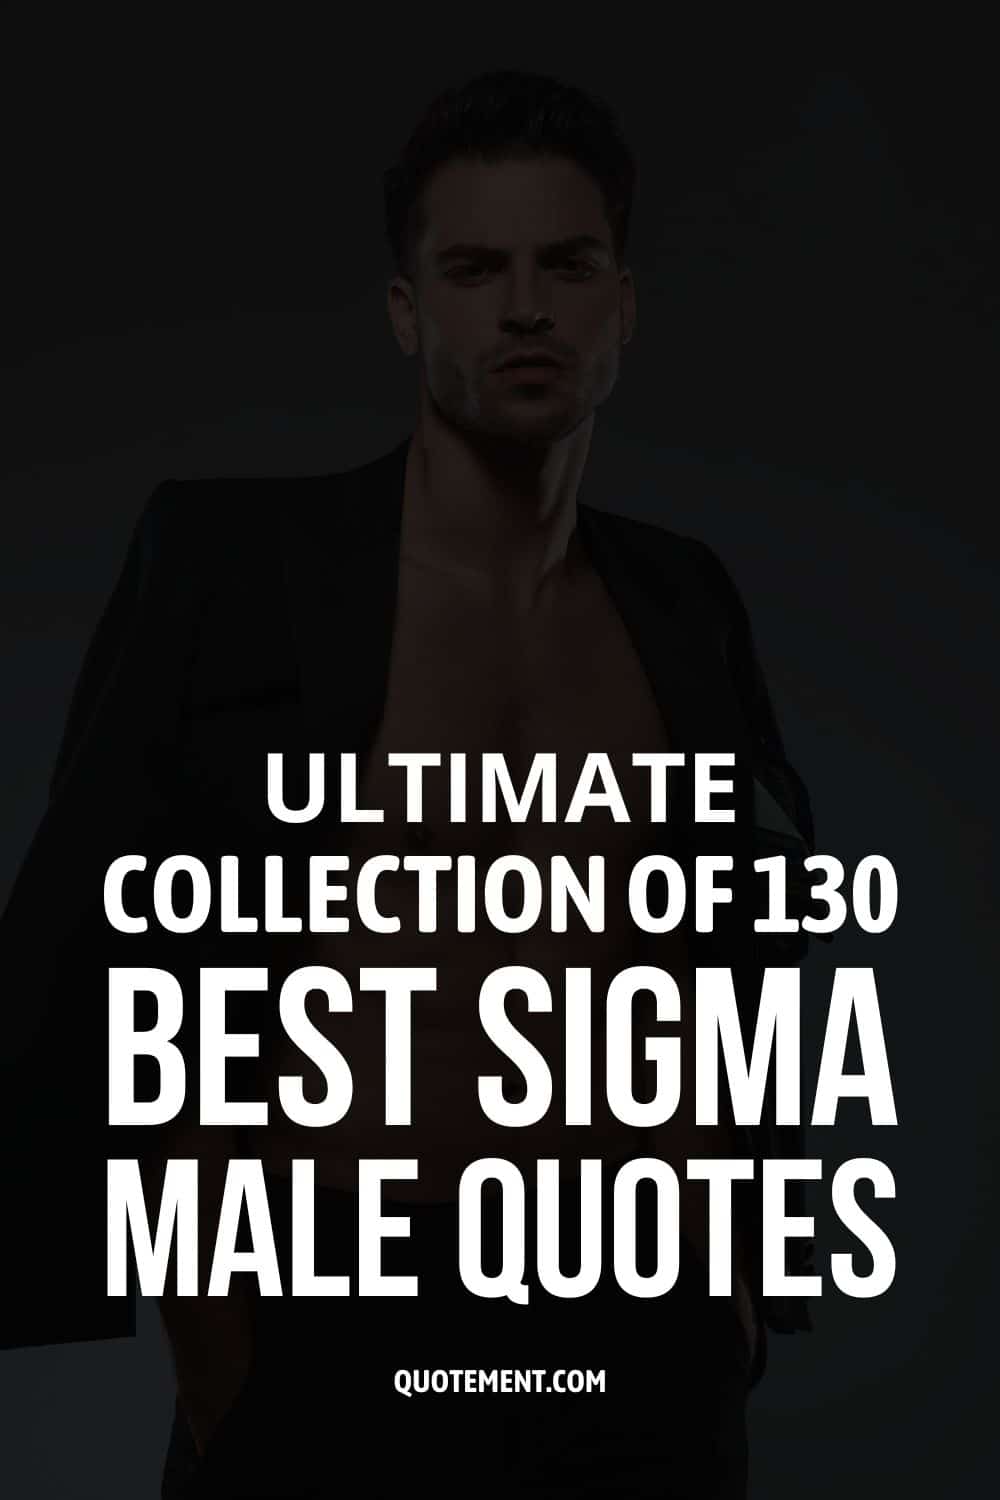 Ultimate Collection Of 130 Best Sigma Male Quotes 